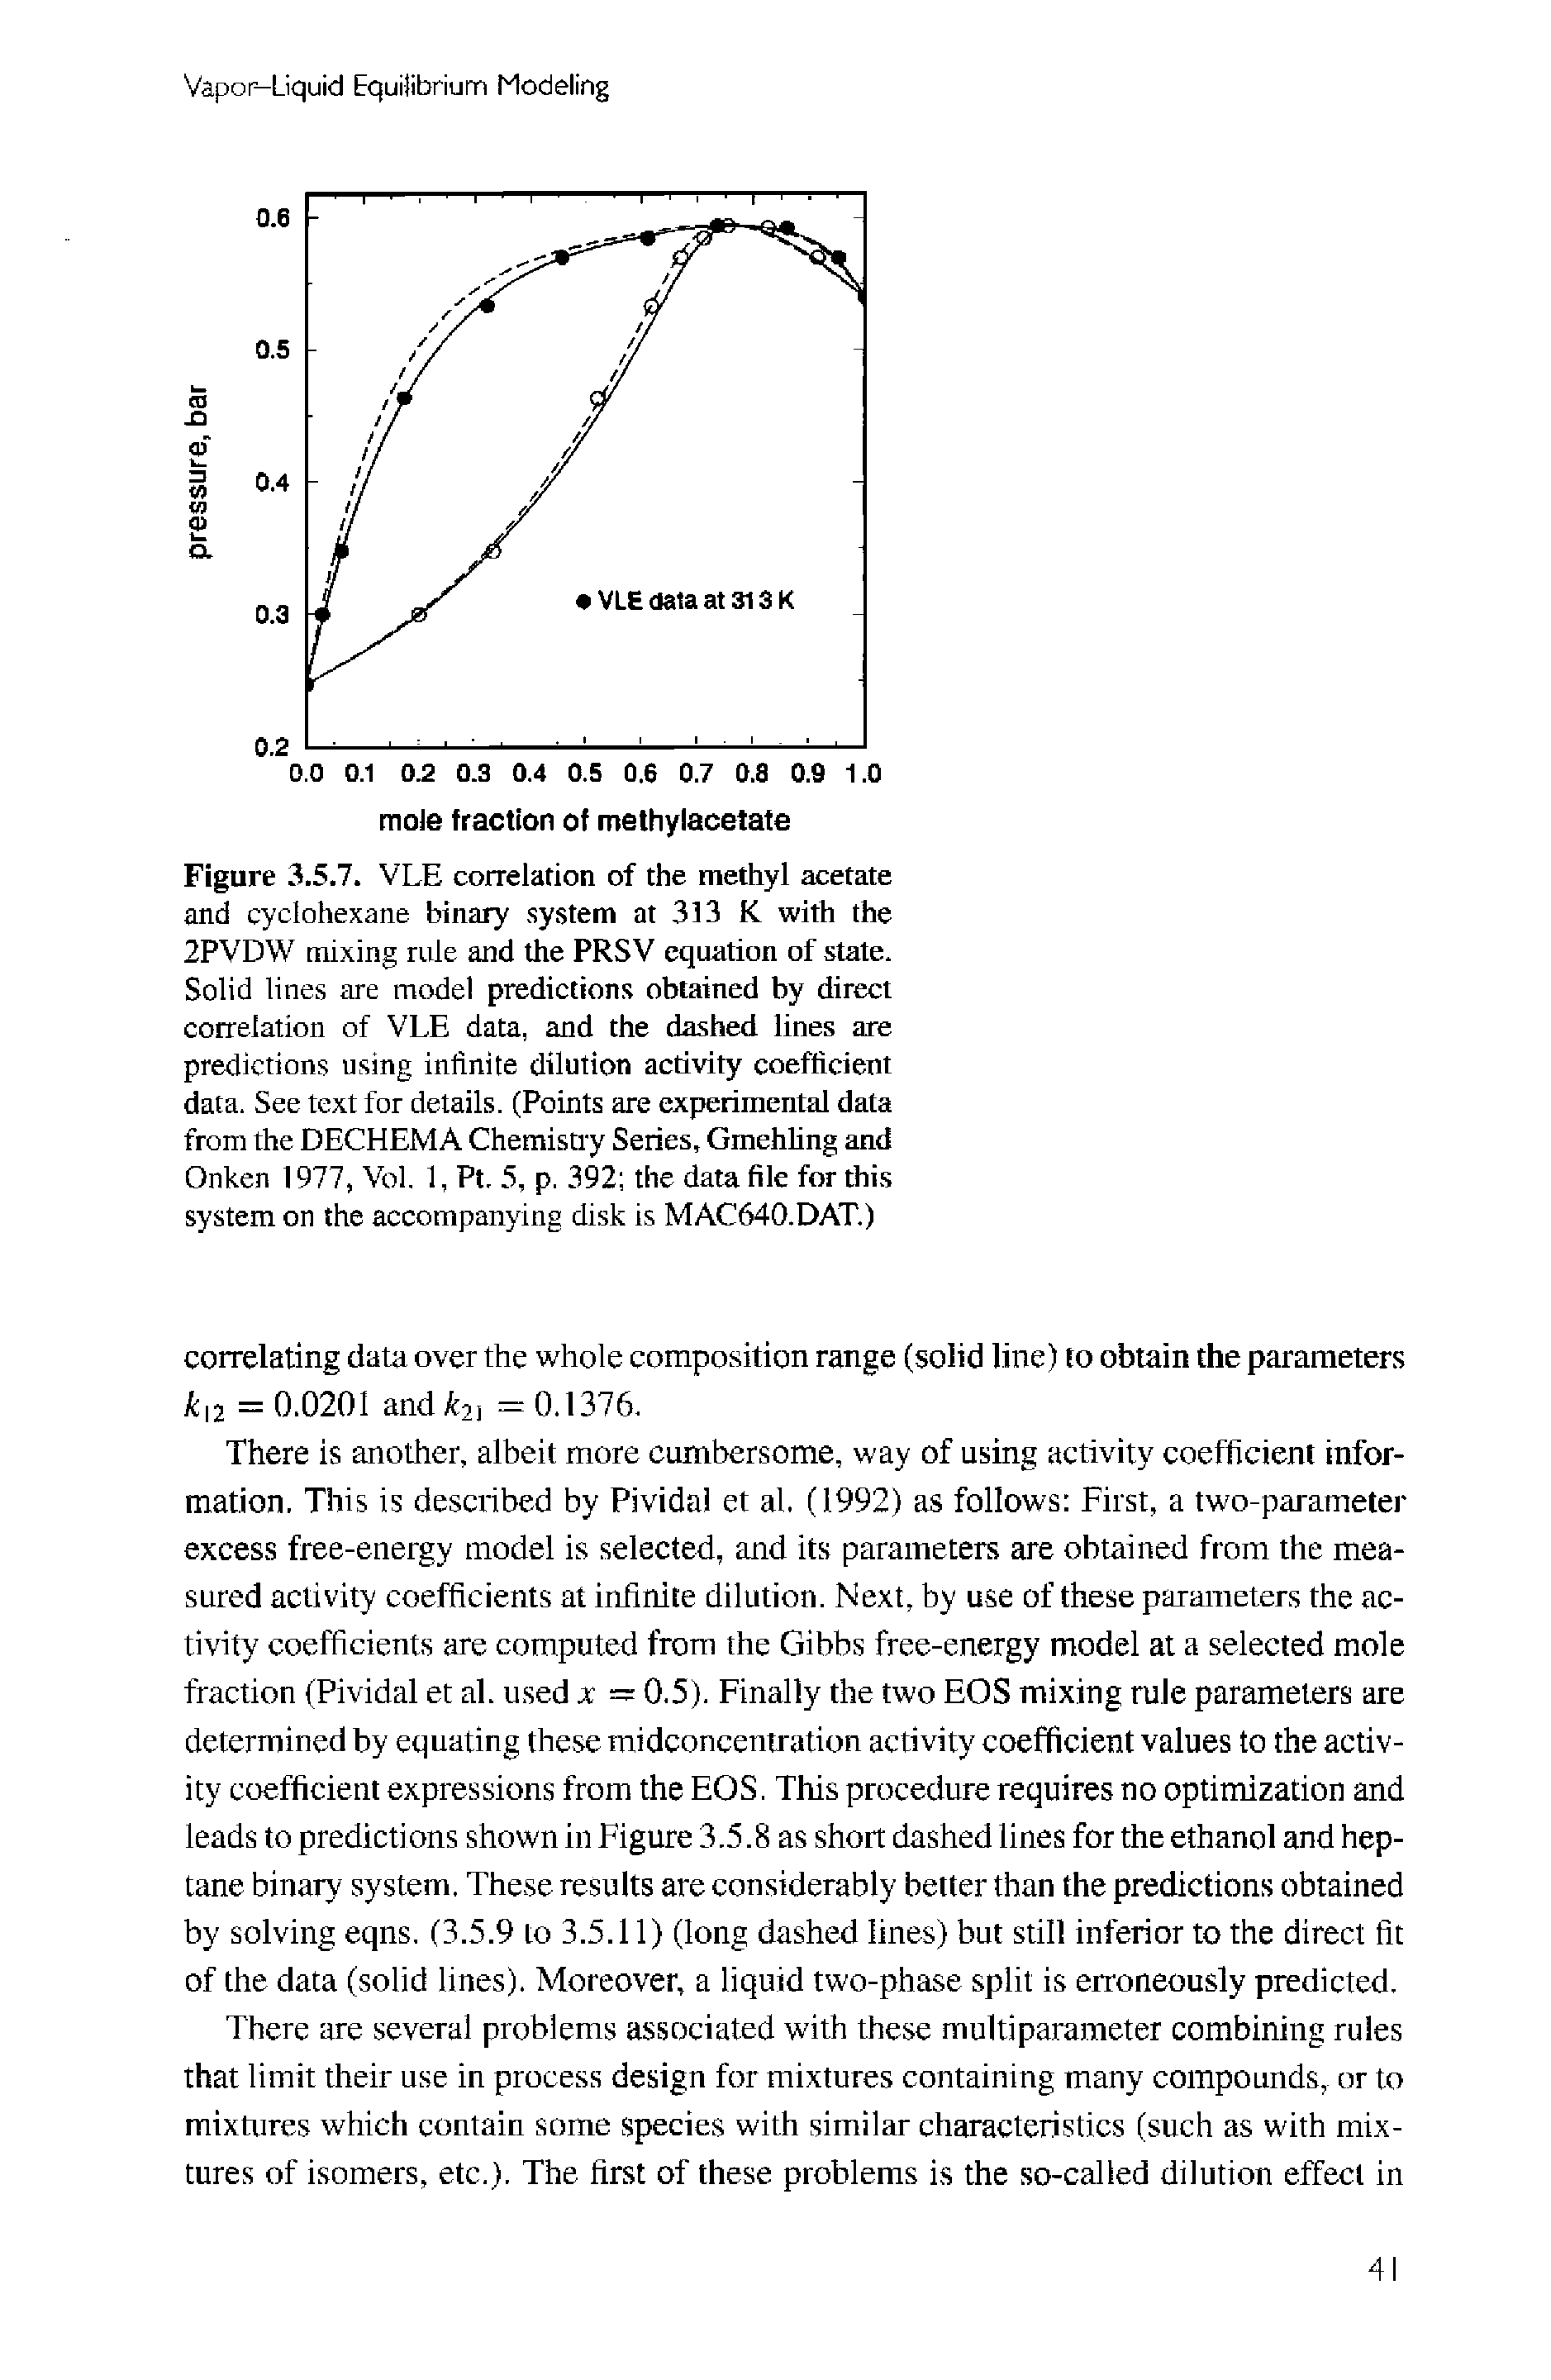 Figure 3.5.7. VLE correlation of the methyl acetate and cyclohexane binary system at 313 K with the 2PVDW mixing rule and the PRSV equation of state. Solid lines are model predictions obtained by direct correlation of VLE data, and the dashed lines are predictions using infinite dilution activity coefficient data. See text for details. (Points are experimental data from the DECHEMA Chemistry Series, Gmehling and Onken 1977, Vol. 1, Pt. 5, p. 392 the data file for this system on the accompanying disk is MAC640.DAT.)...